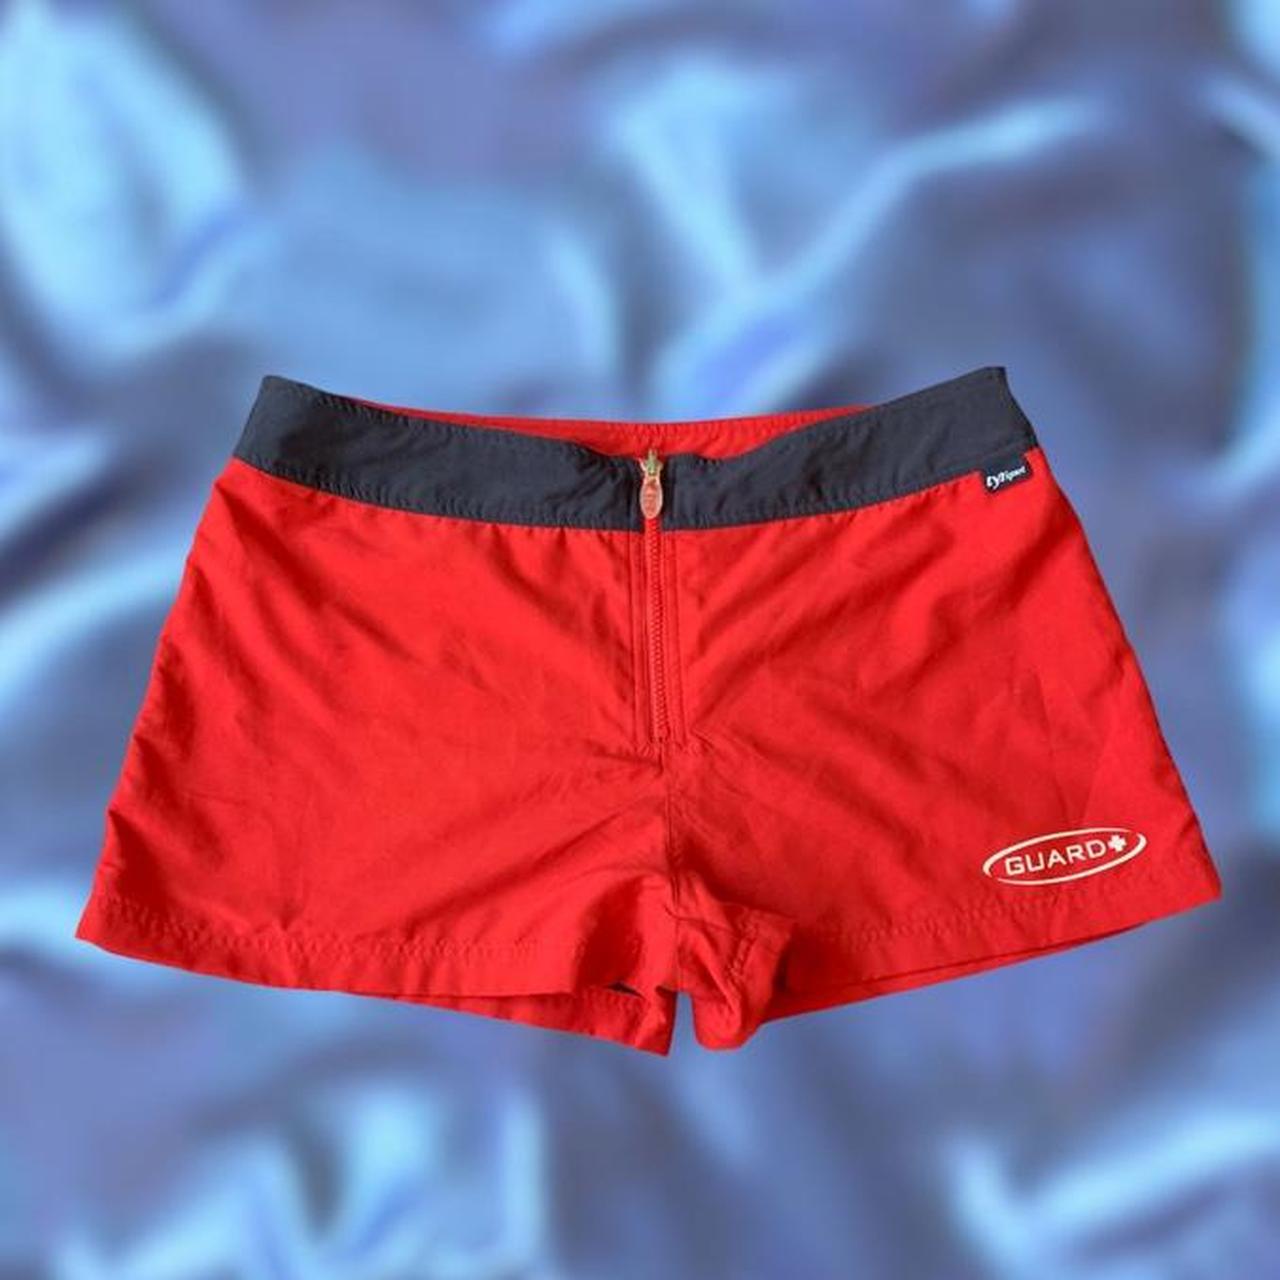 do Sport Women's Navy and Red Shorts